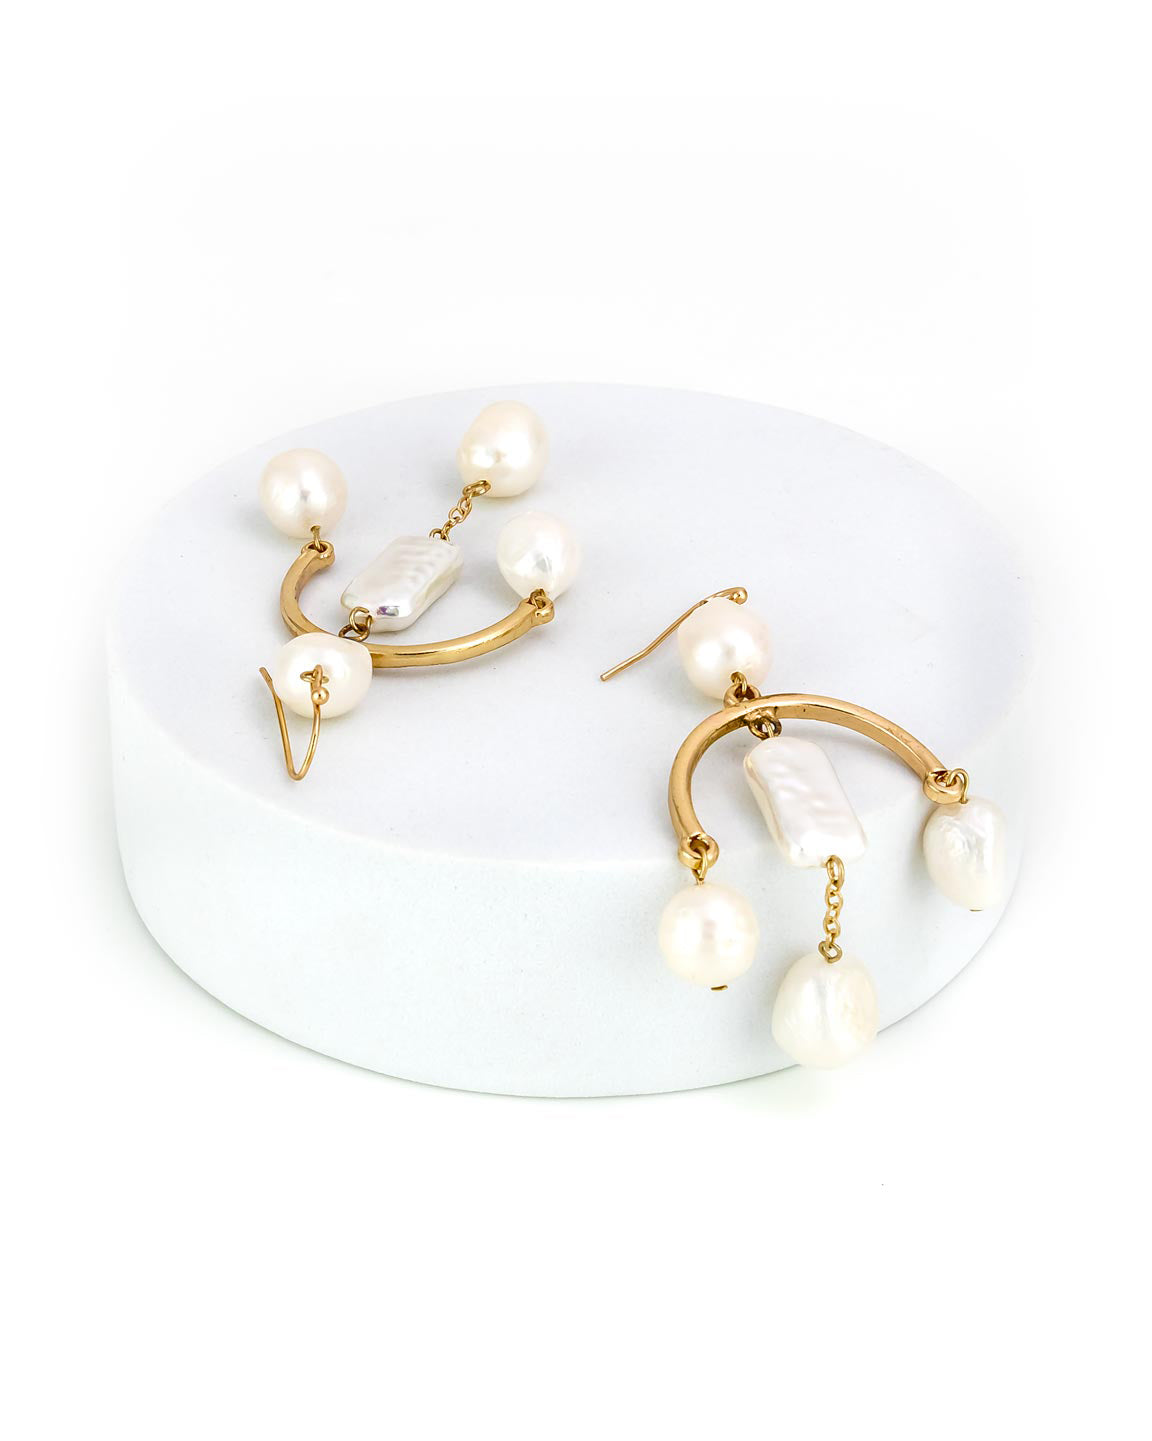 Dauplaise Jewelry - Mobile Pearl Statement Earrings